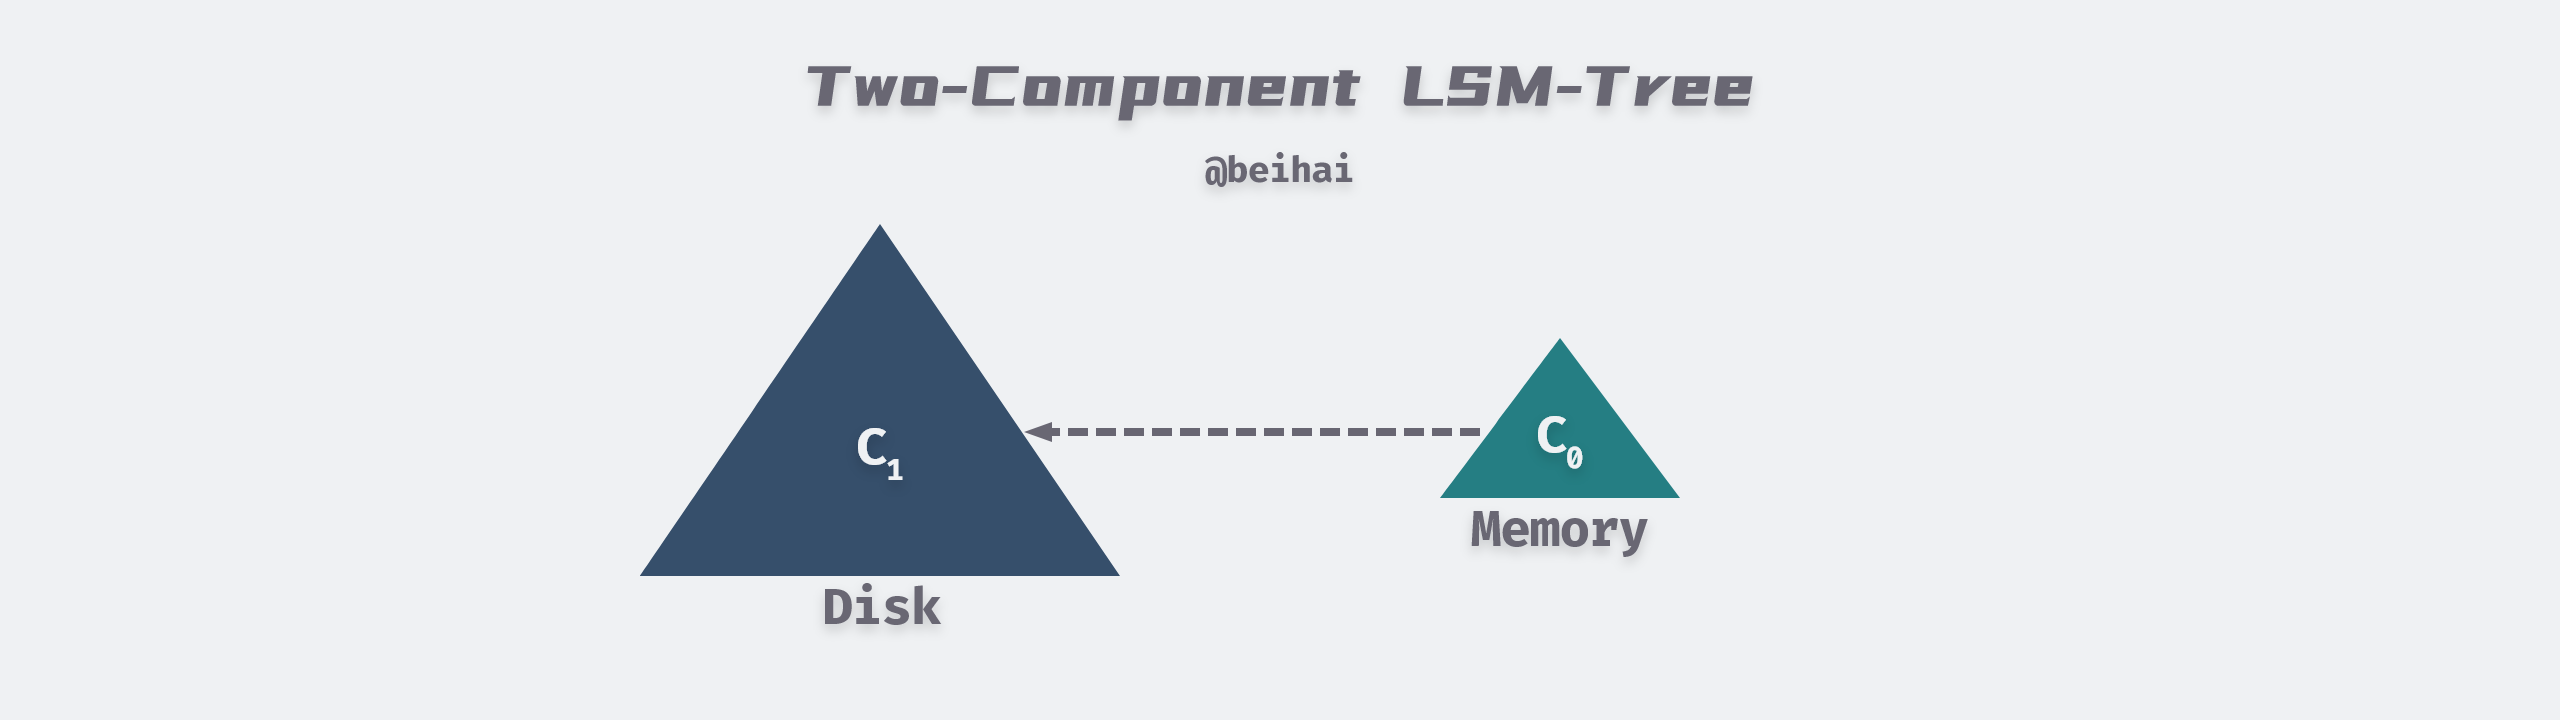 Two-Component LSM-Tree